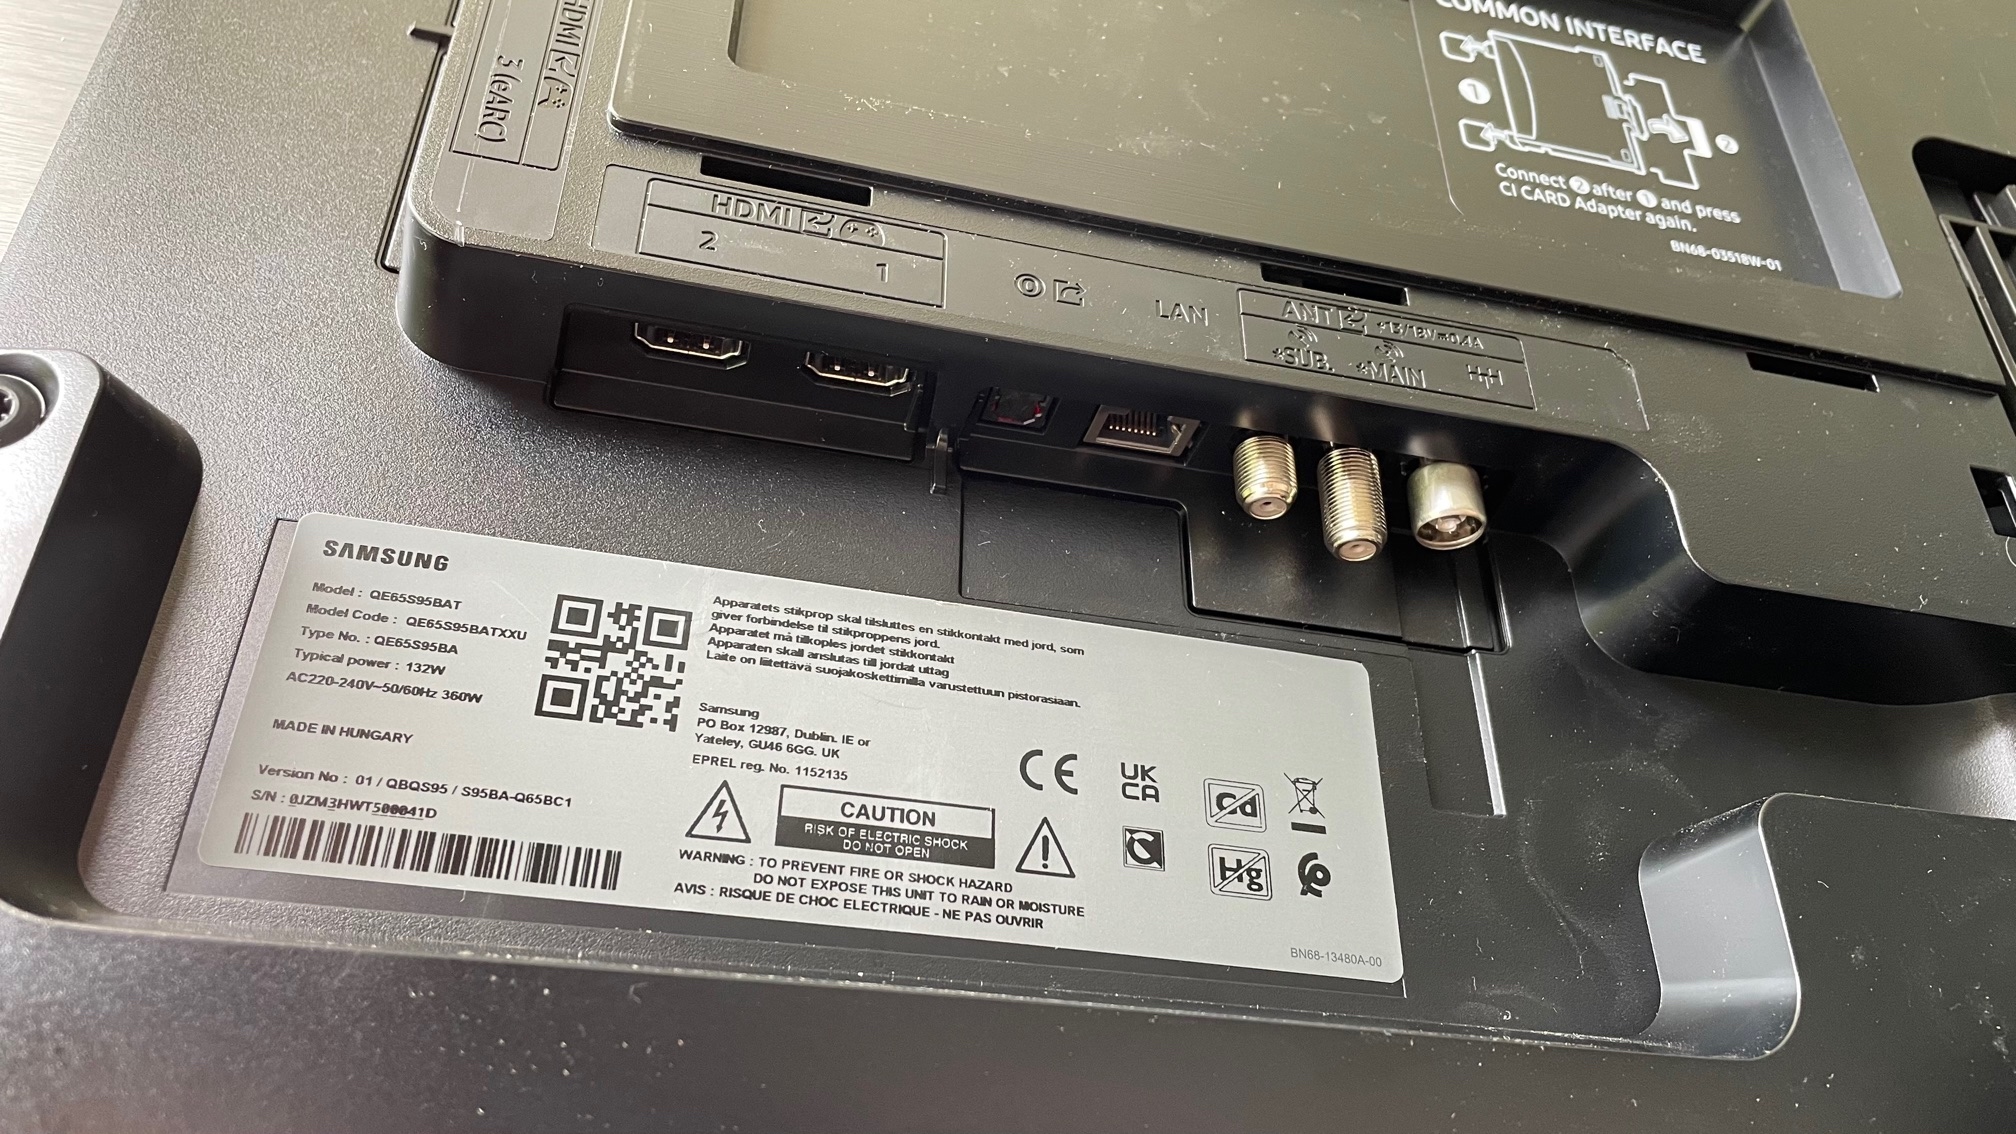 Samsung S95B OLED TV rear panel connections on table